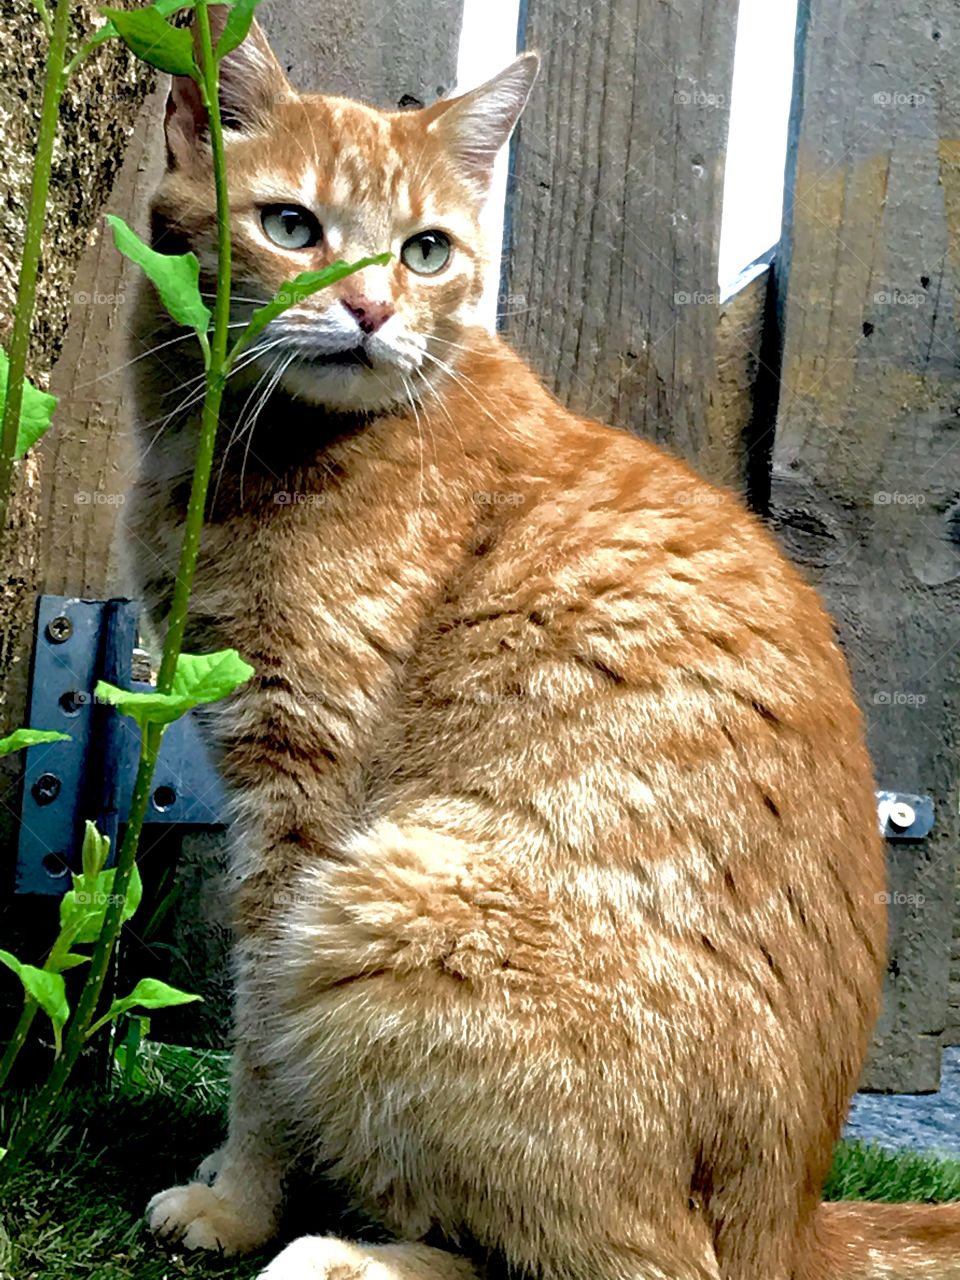 Cat posing for the camera, in front of a gate